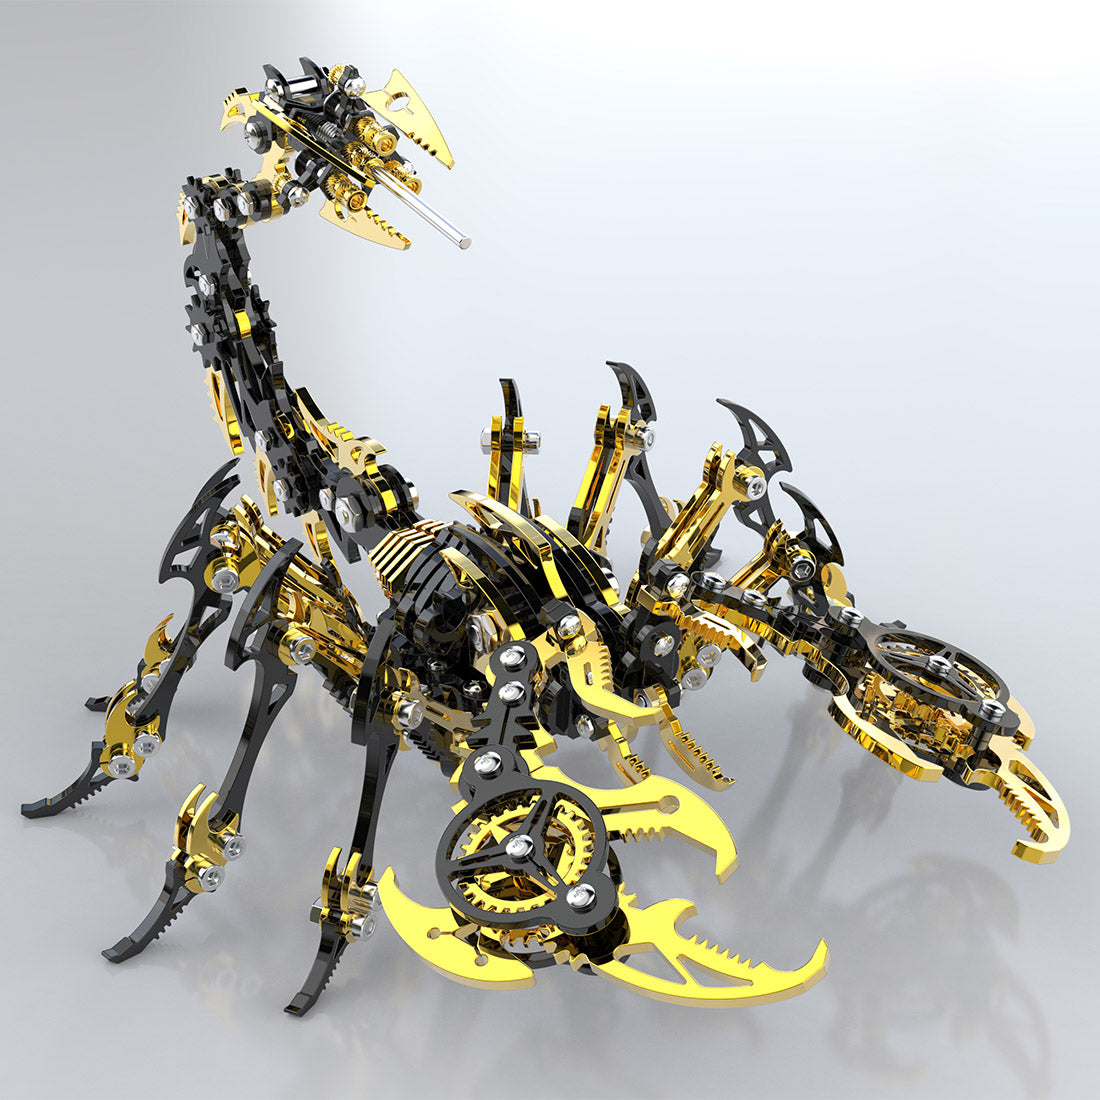 3D DIY Metal Scorpion Kits Mechanical Model Building kits Assembly Toy for Halloween